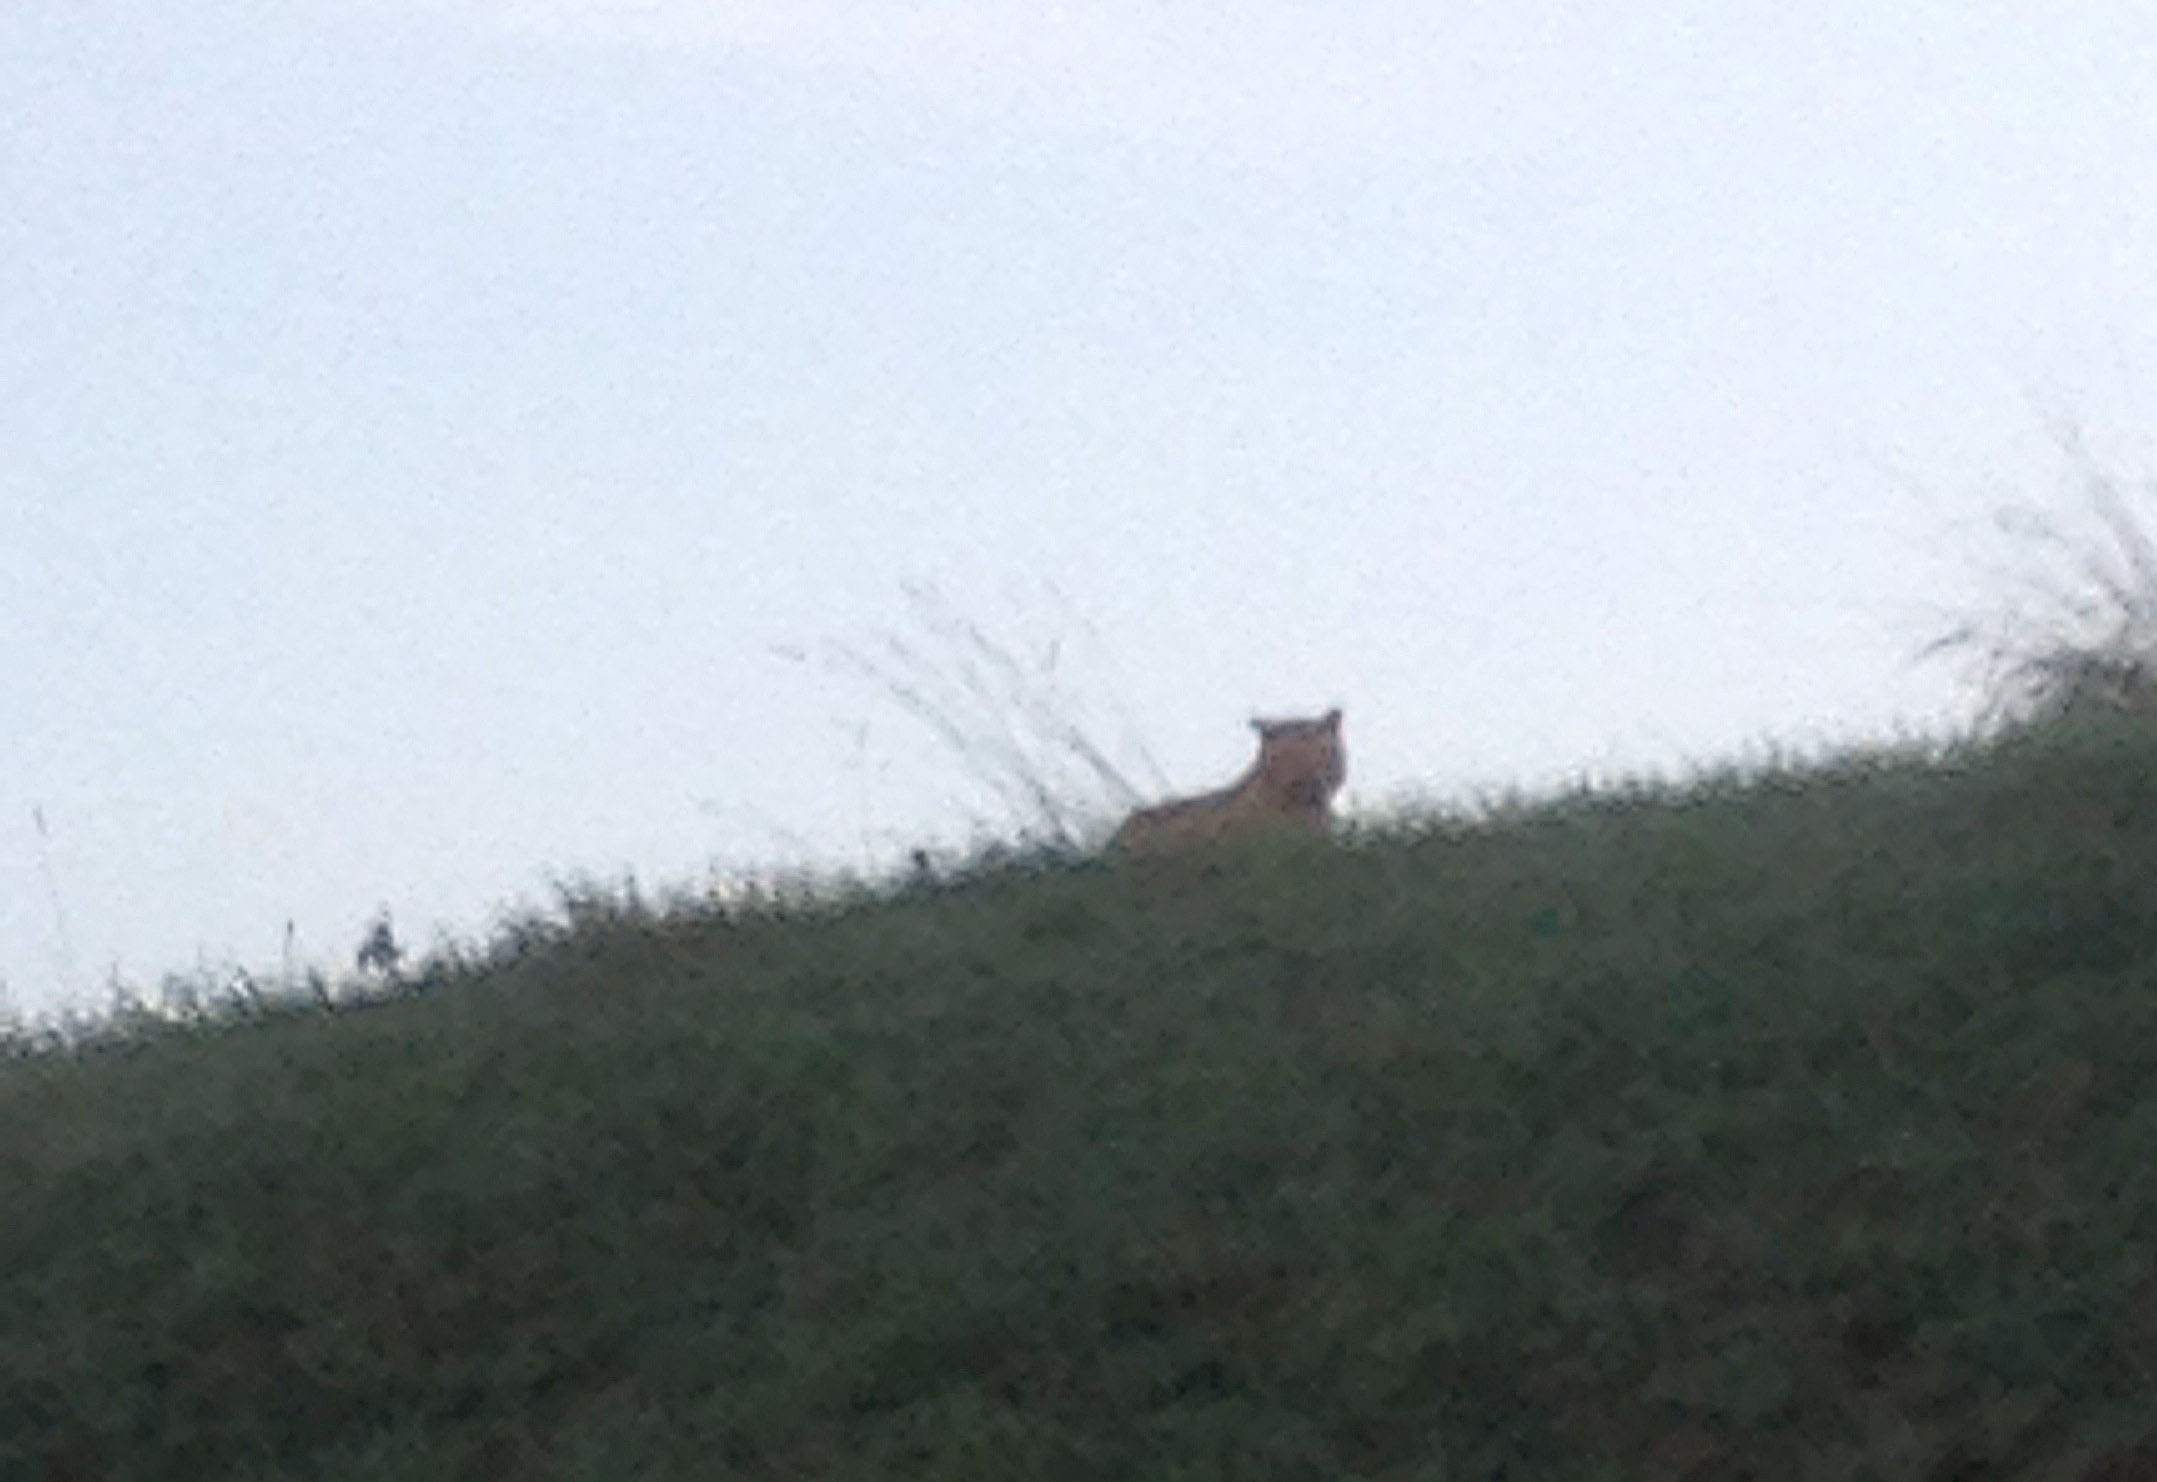 A picture taken by a passerby shows an alleged tiger on the loose walking in Montevrain, east of Paris, on Nov. 13, 2014.